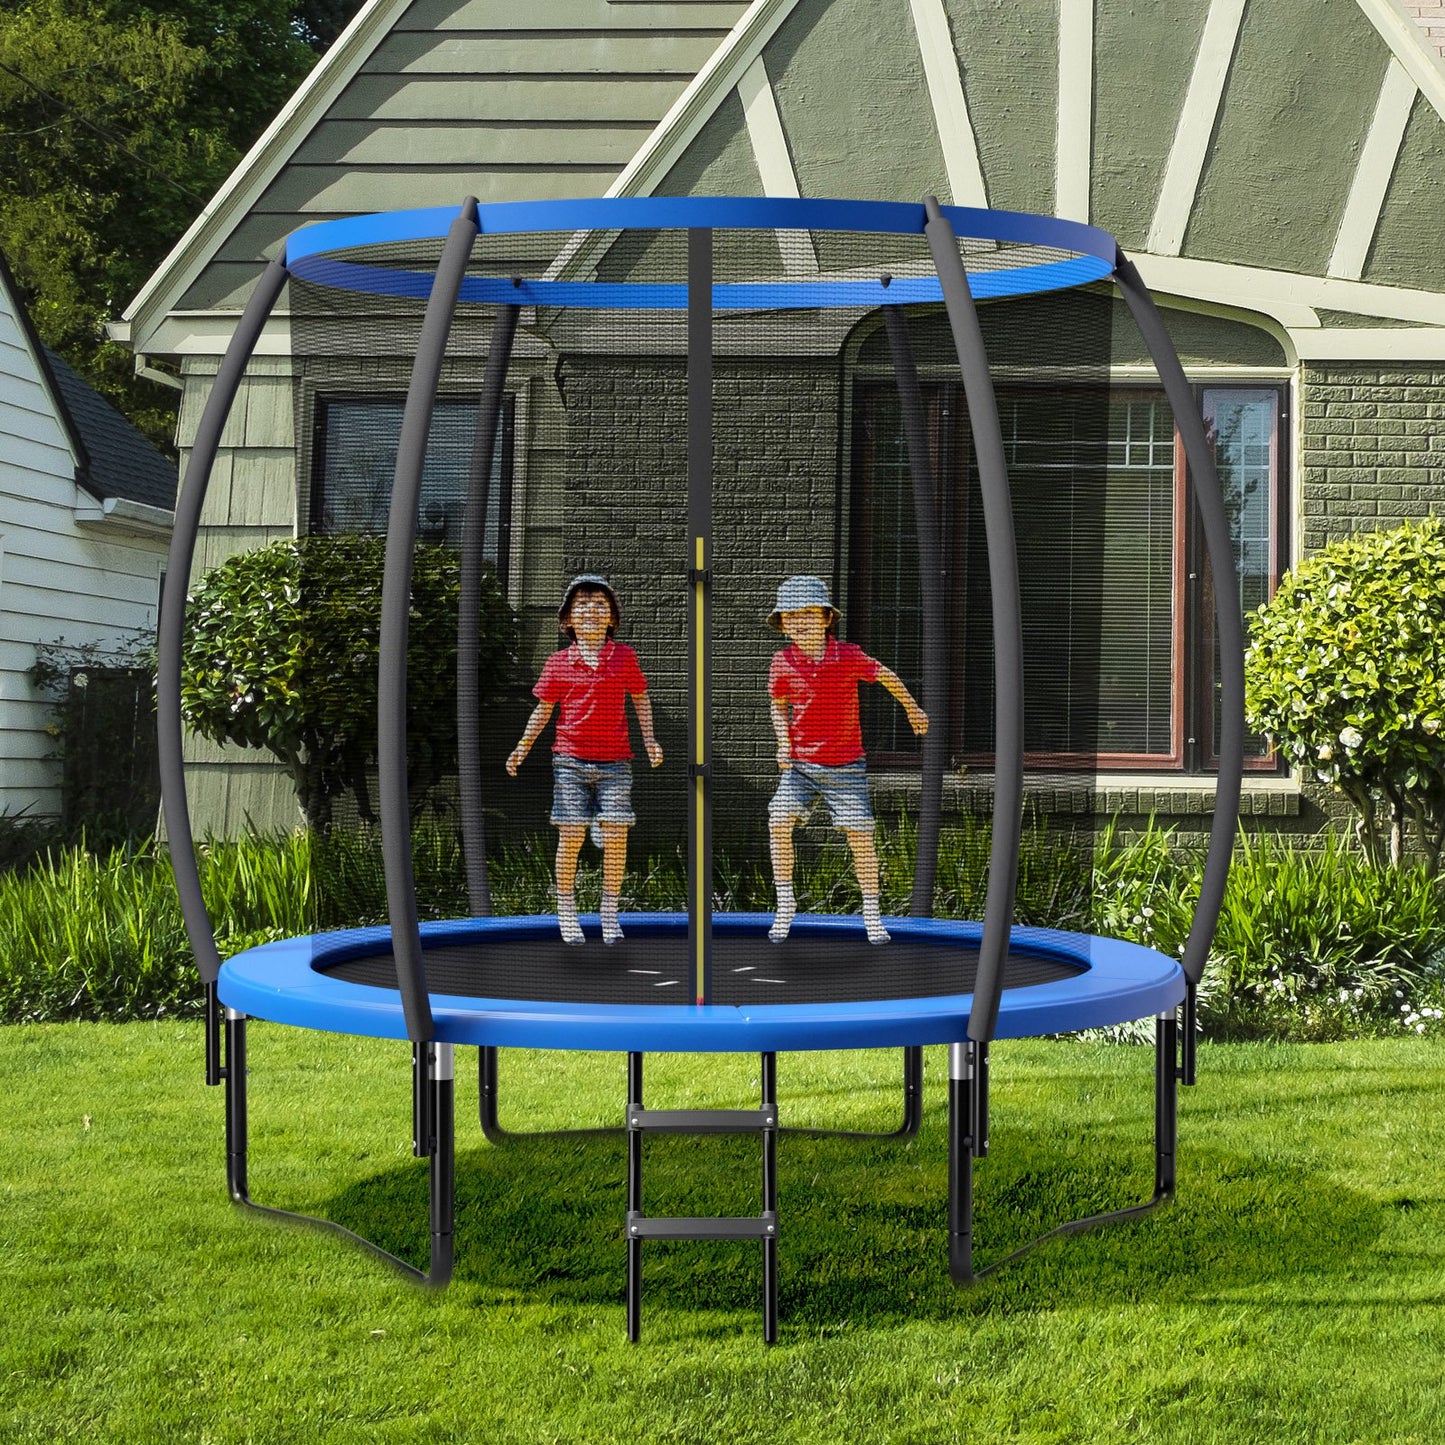 8 Feet ASTM Approved Recreational Trampoline with Ladder, Blue - Gallery Canada